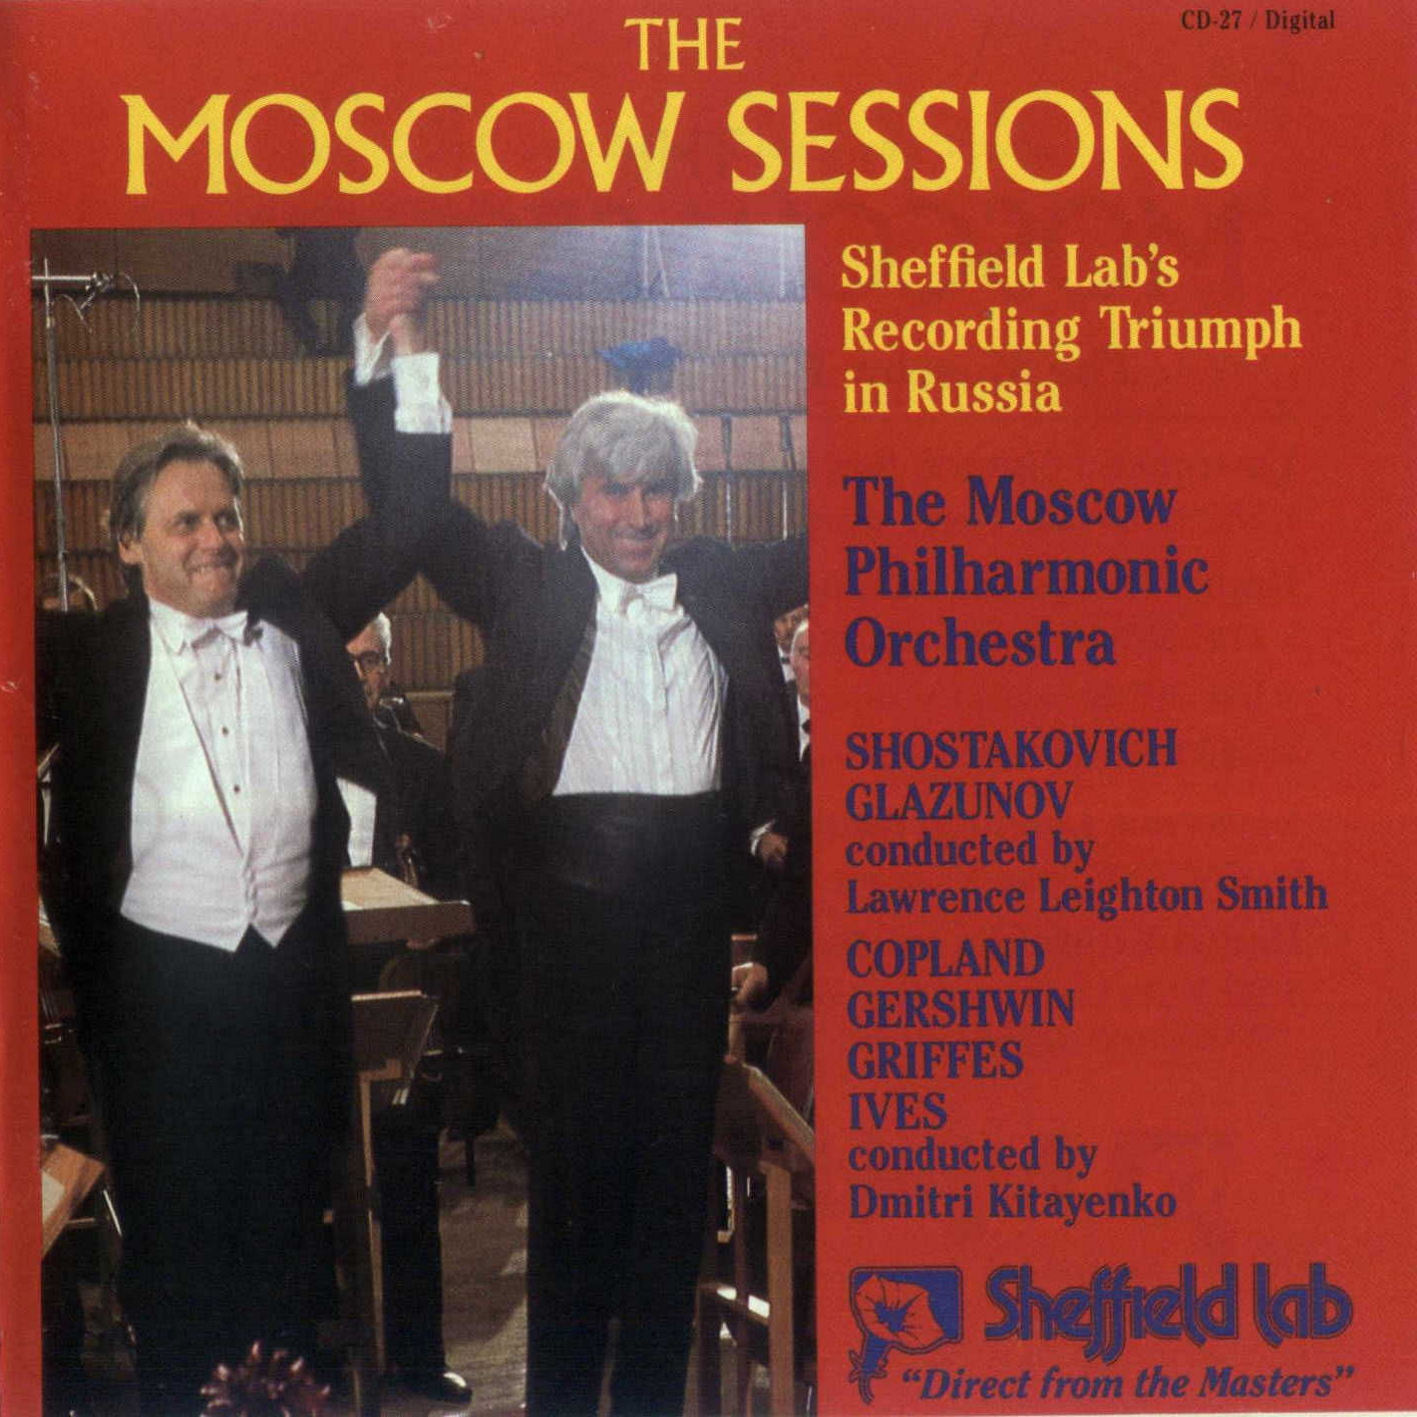 The Moscow Sessions Vol. 3